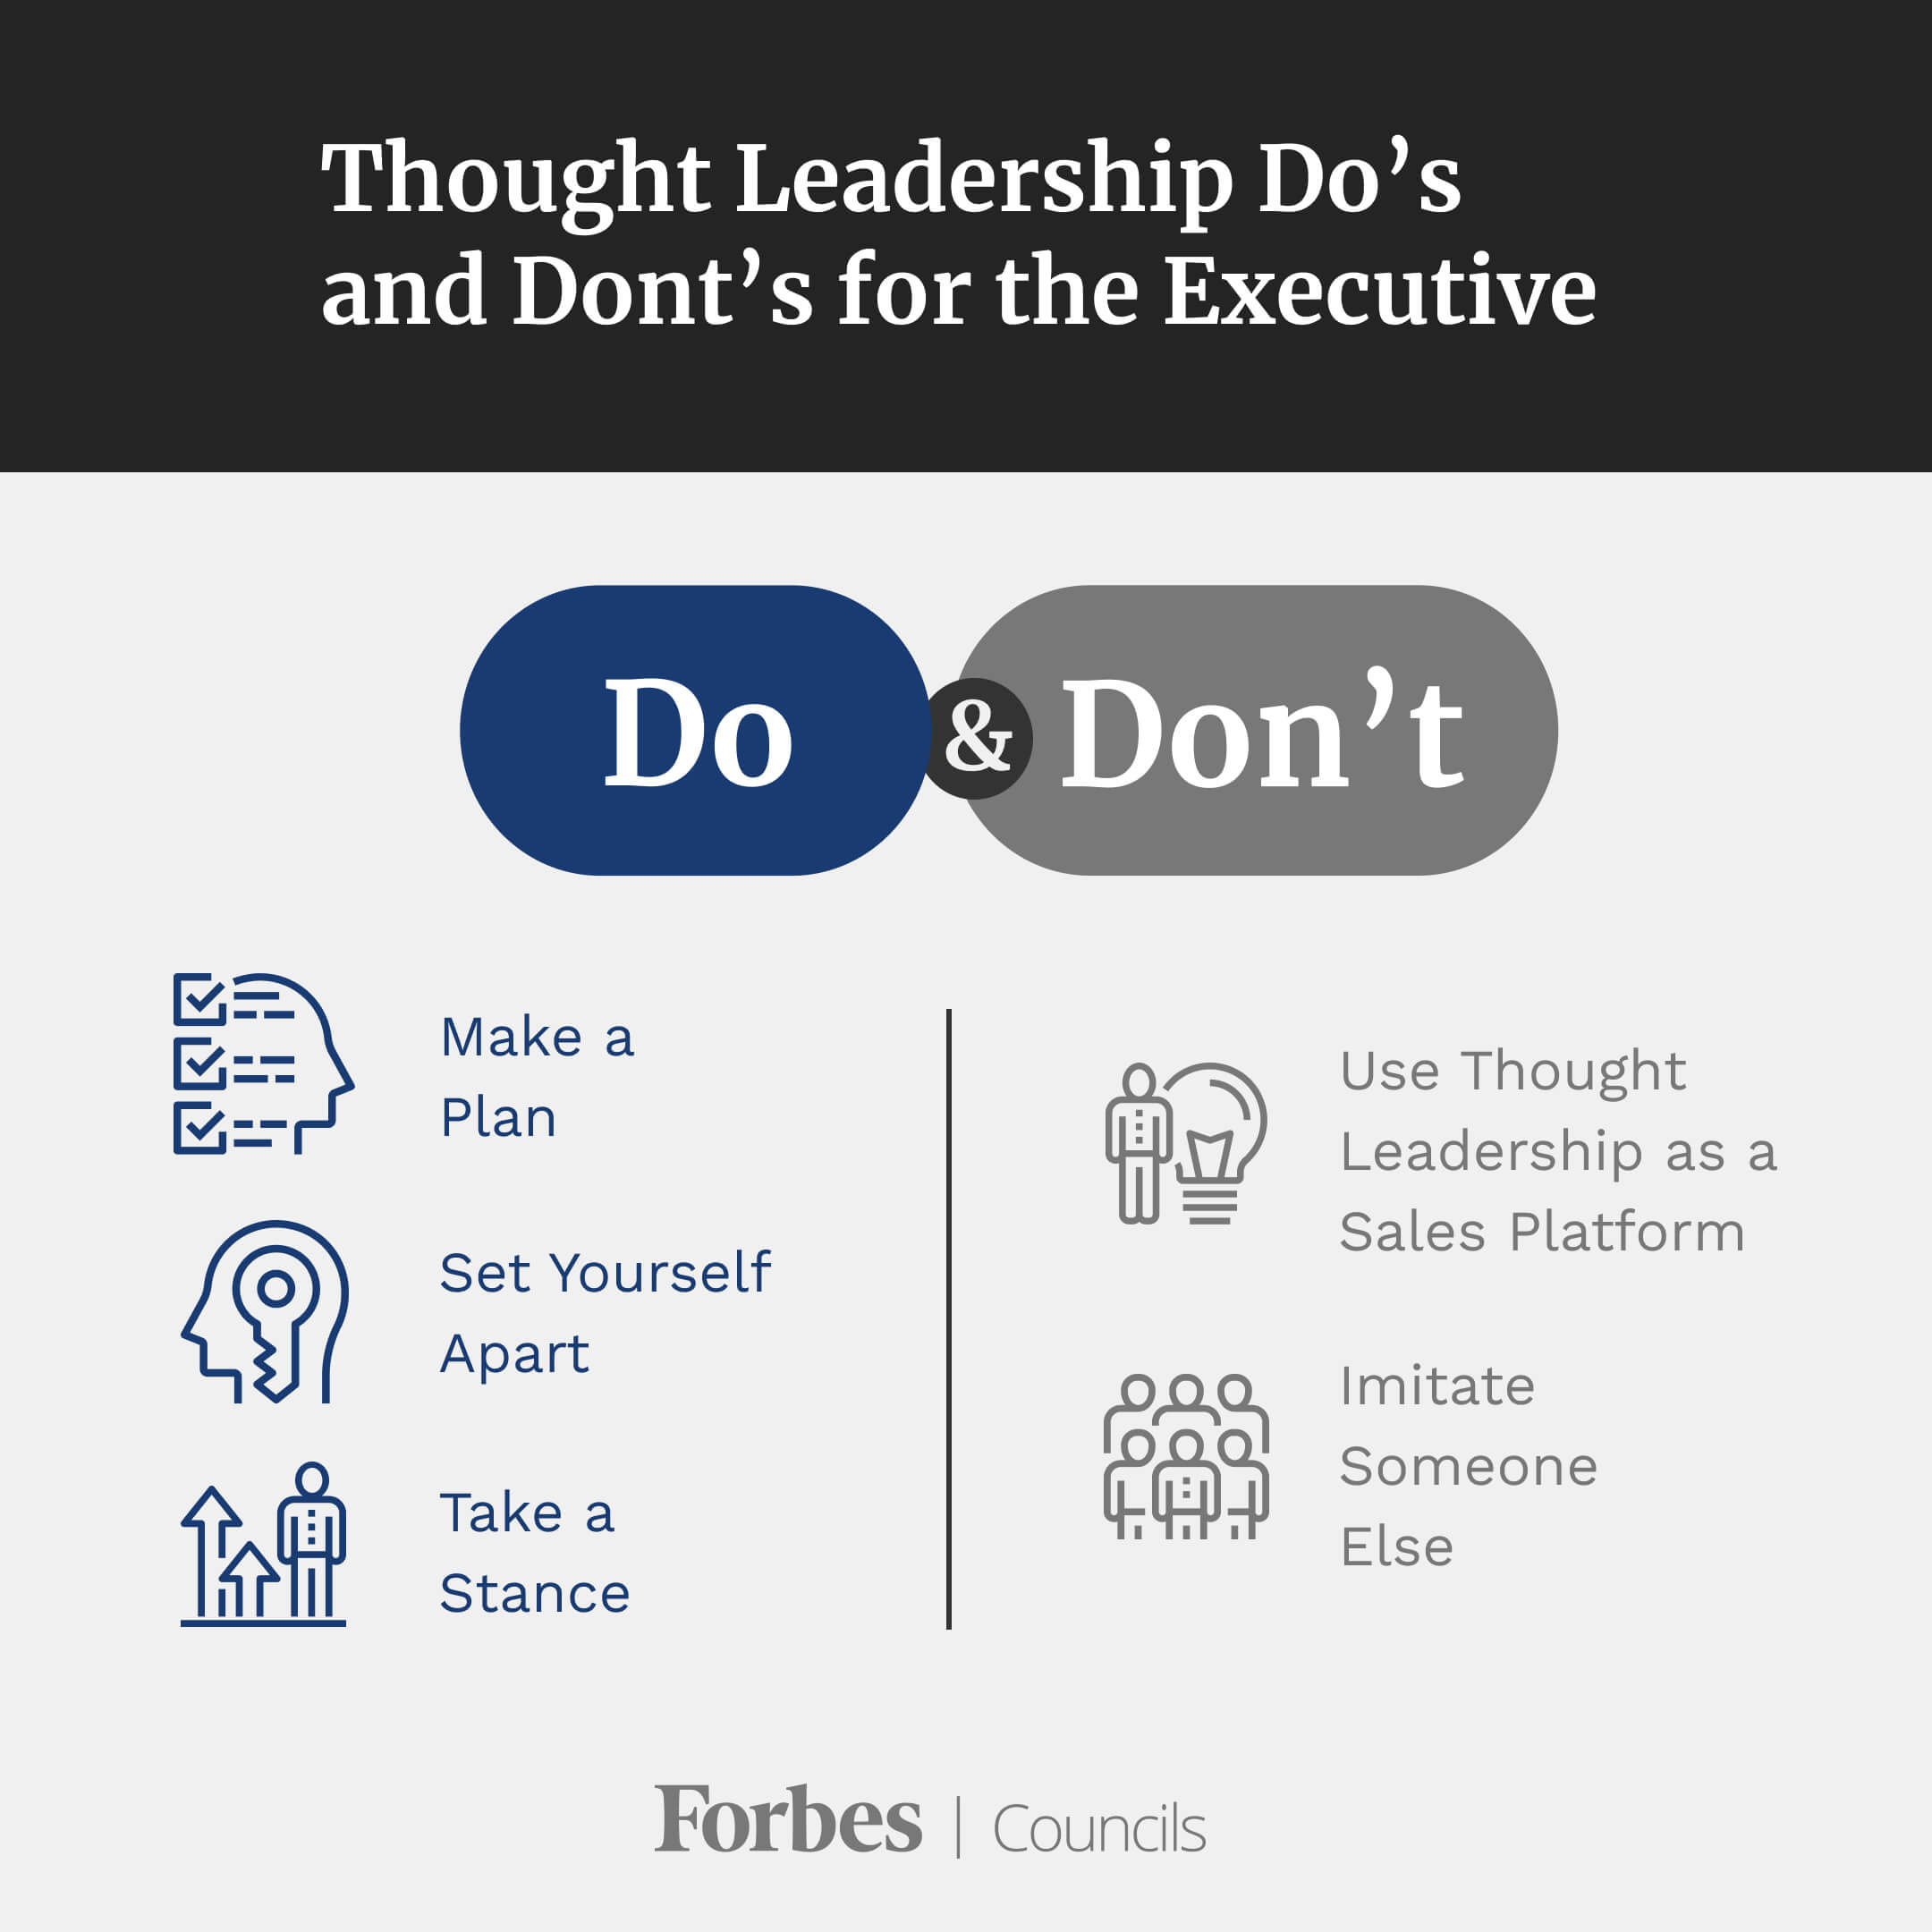 Thought-Leadership-Dos-and-Donts-for-the-Executive-1